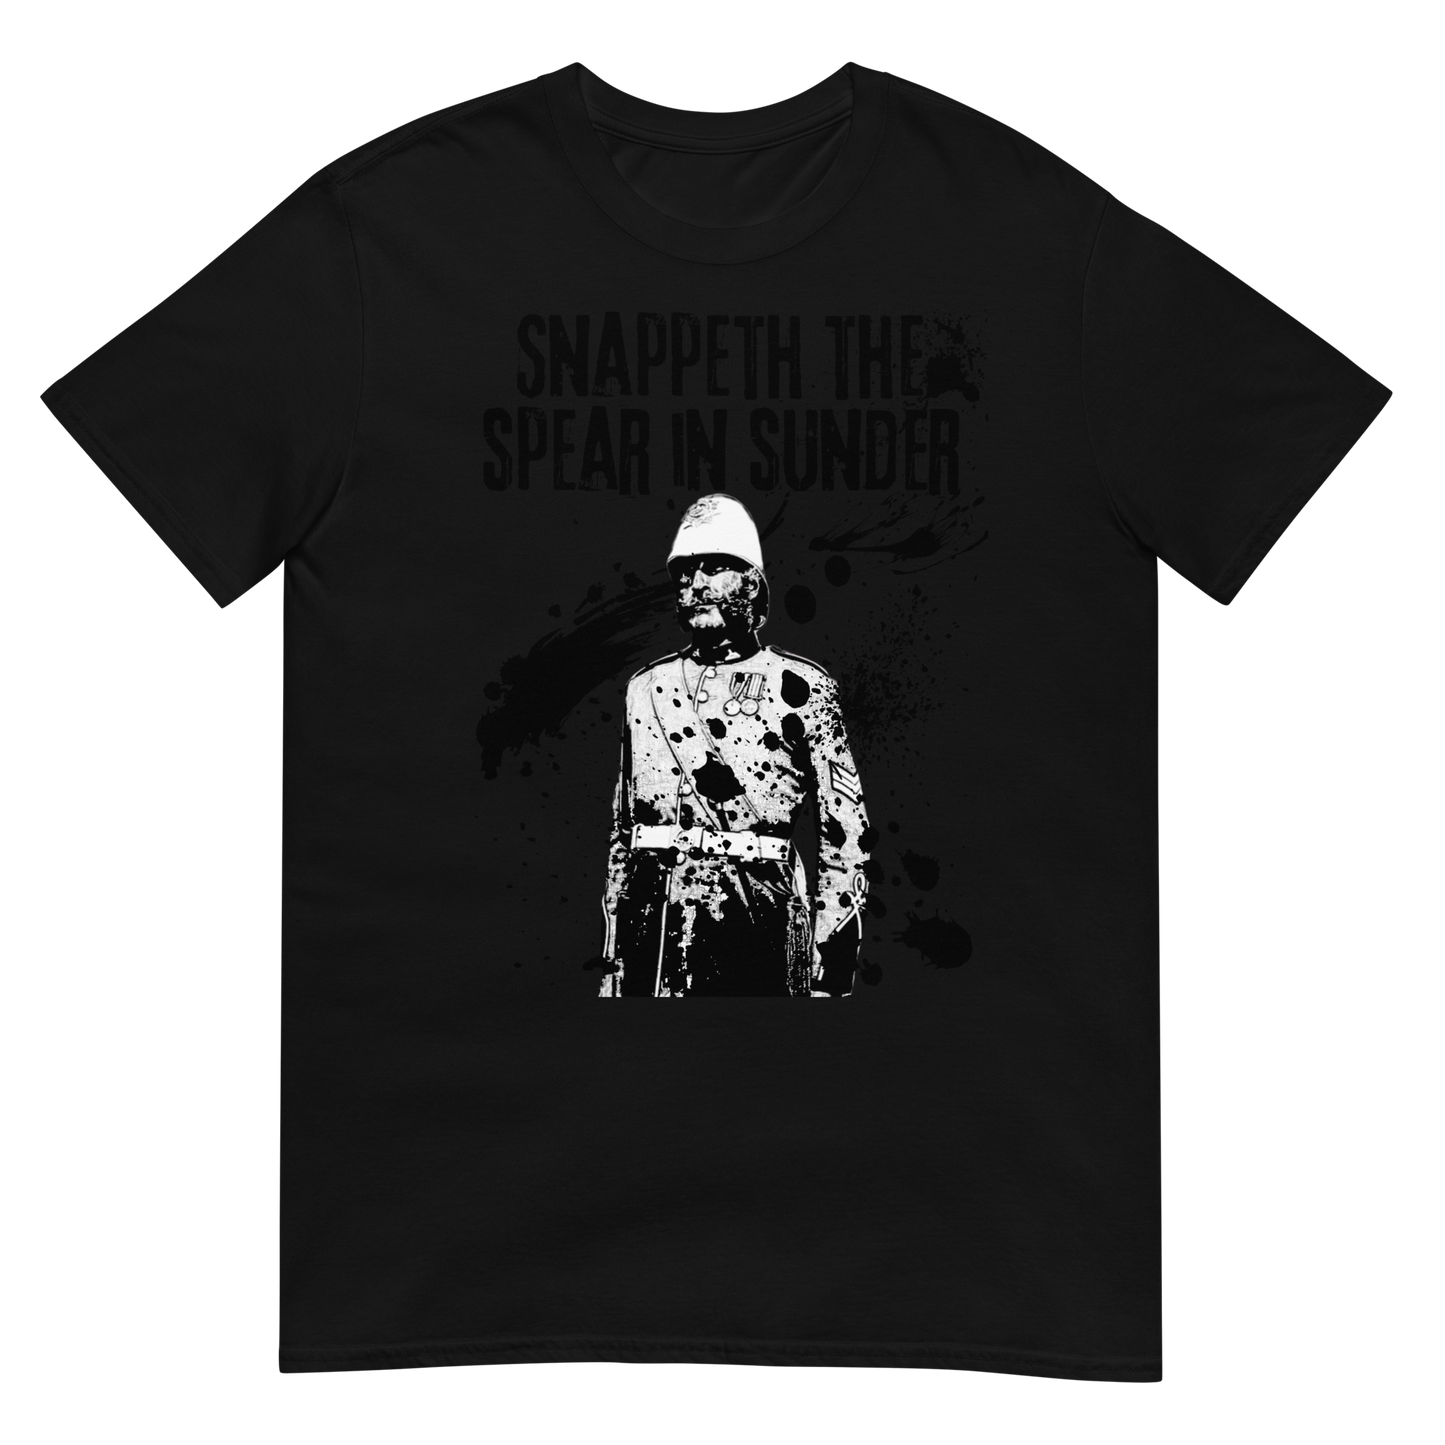 Snappeth The Spear In Sunder (t-shirt)